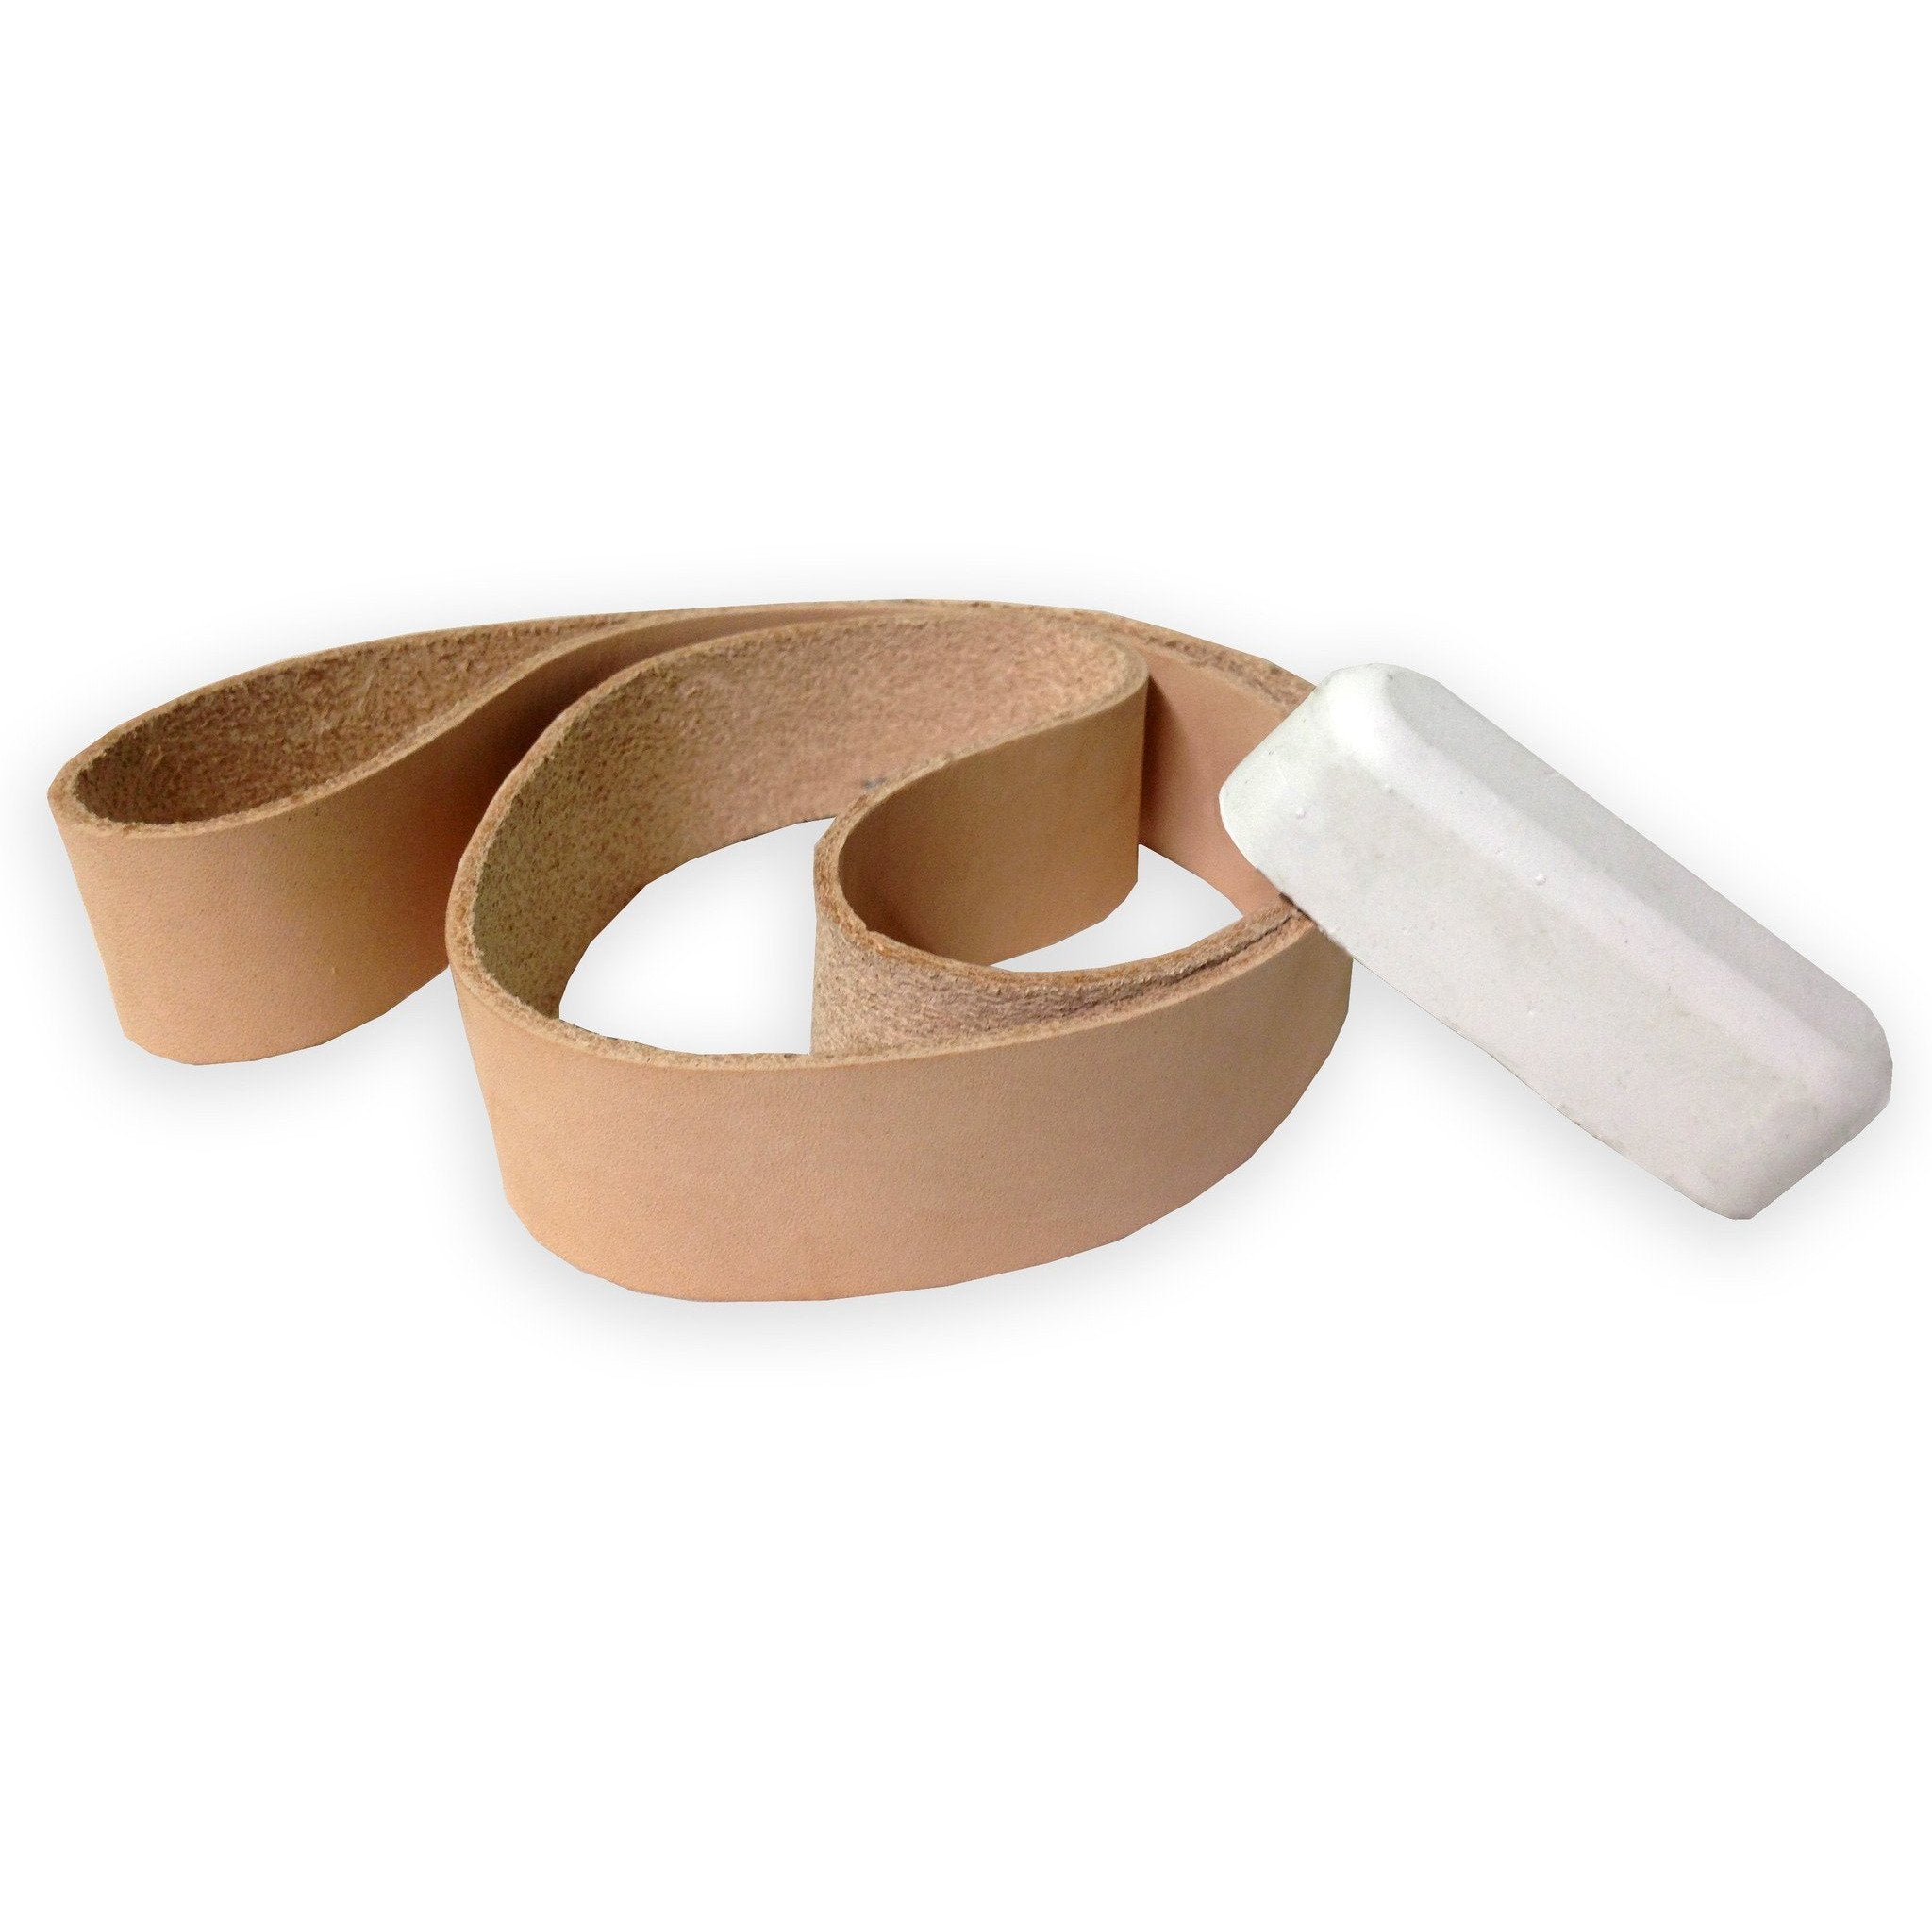 Leather Honing Stropping Belt with Compound